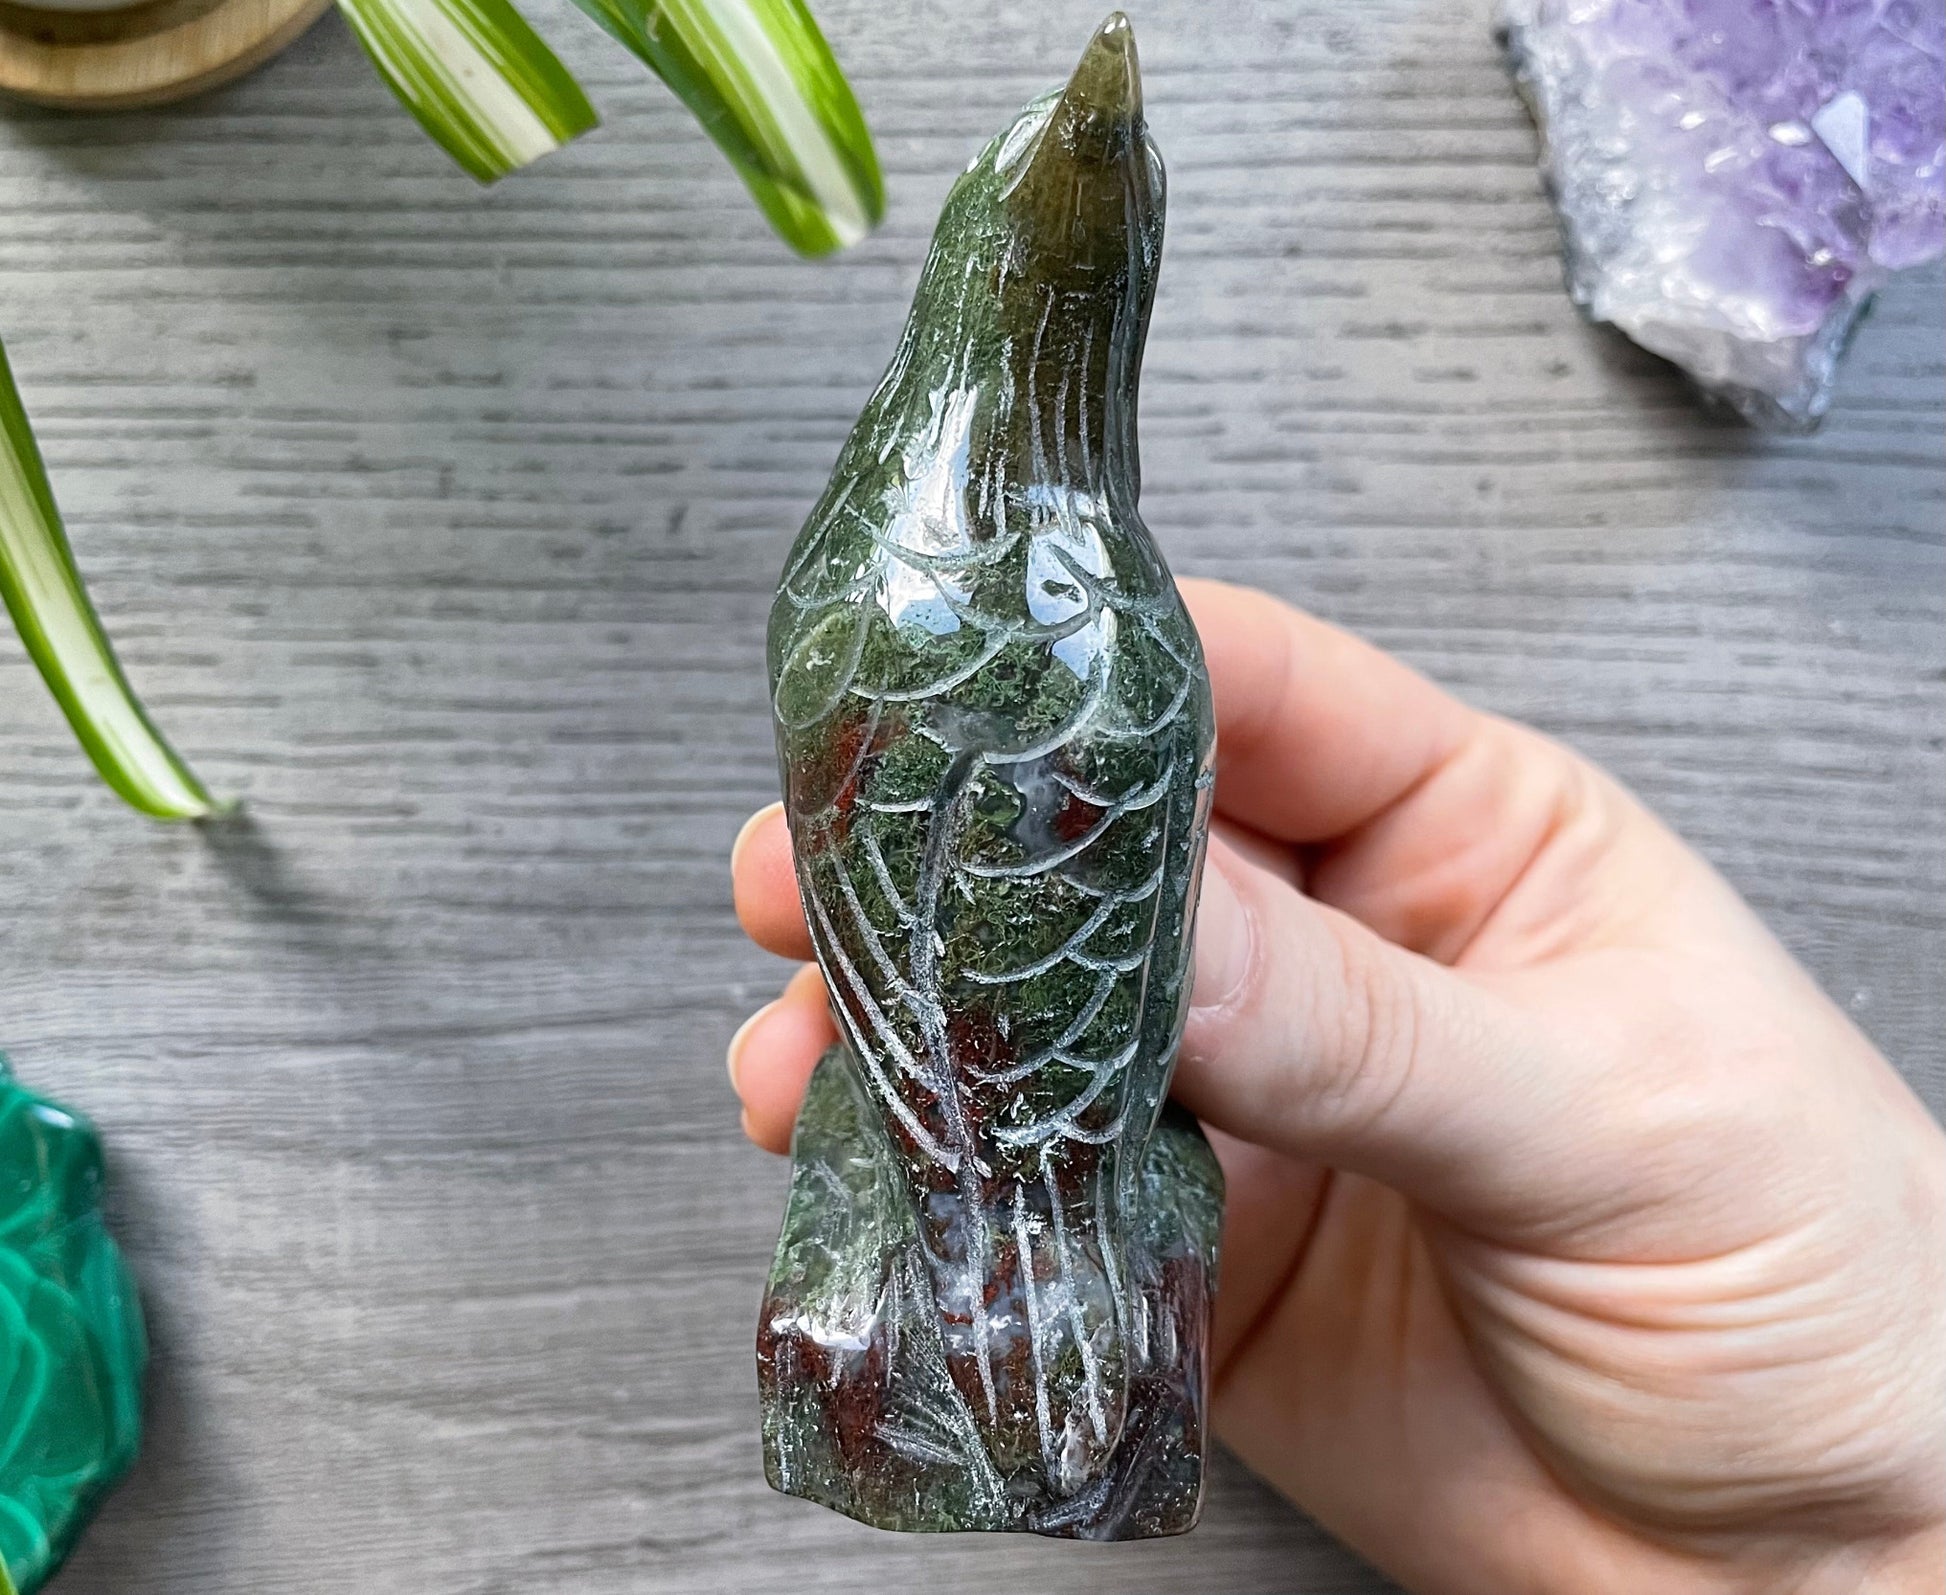 Pictured is a bird or raven carved out of moss agate.